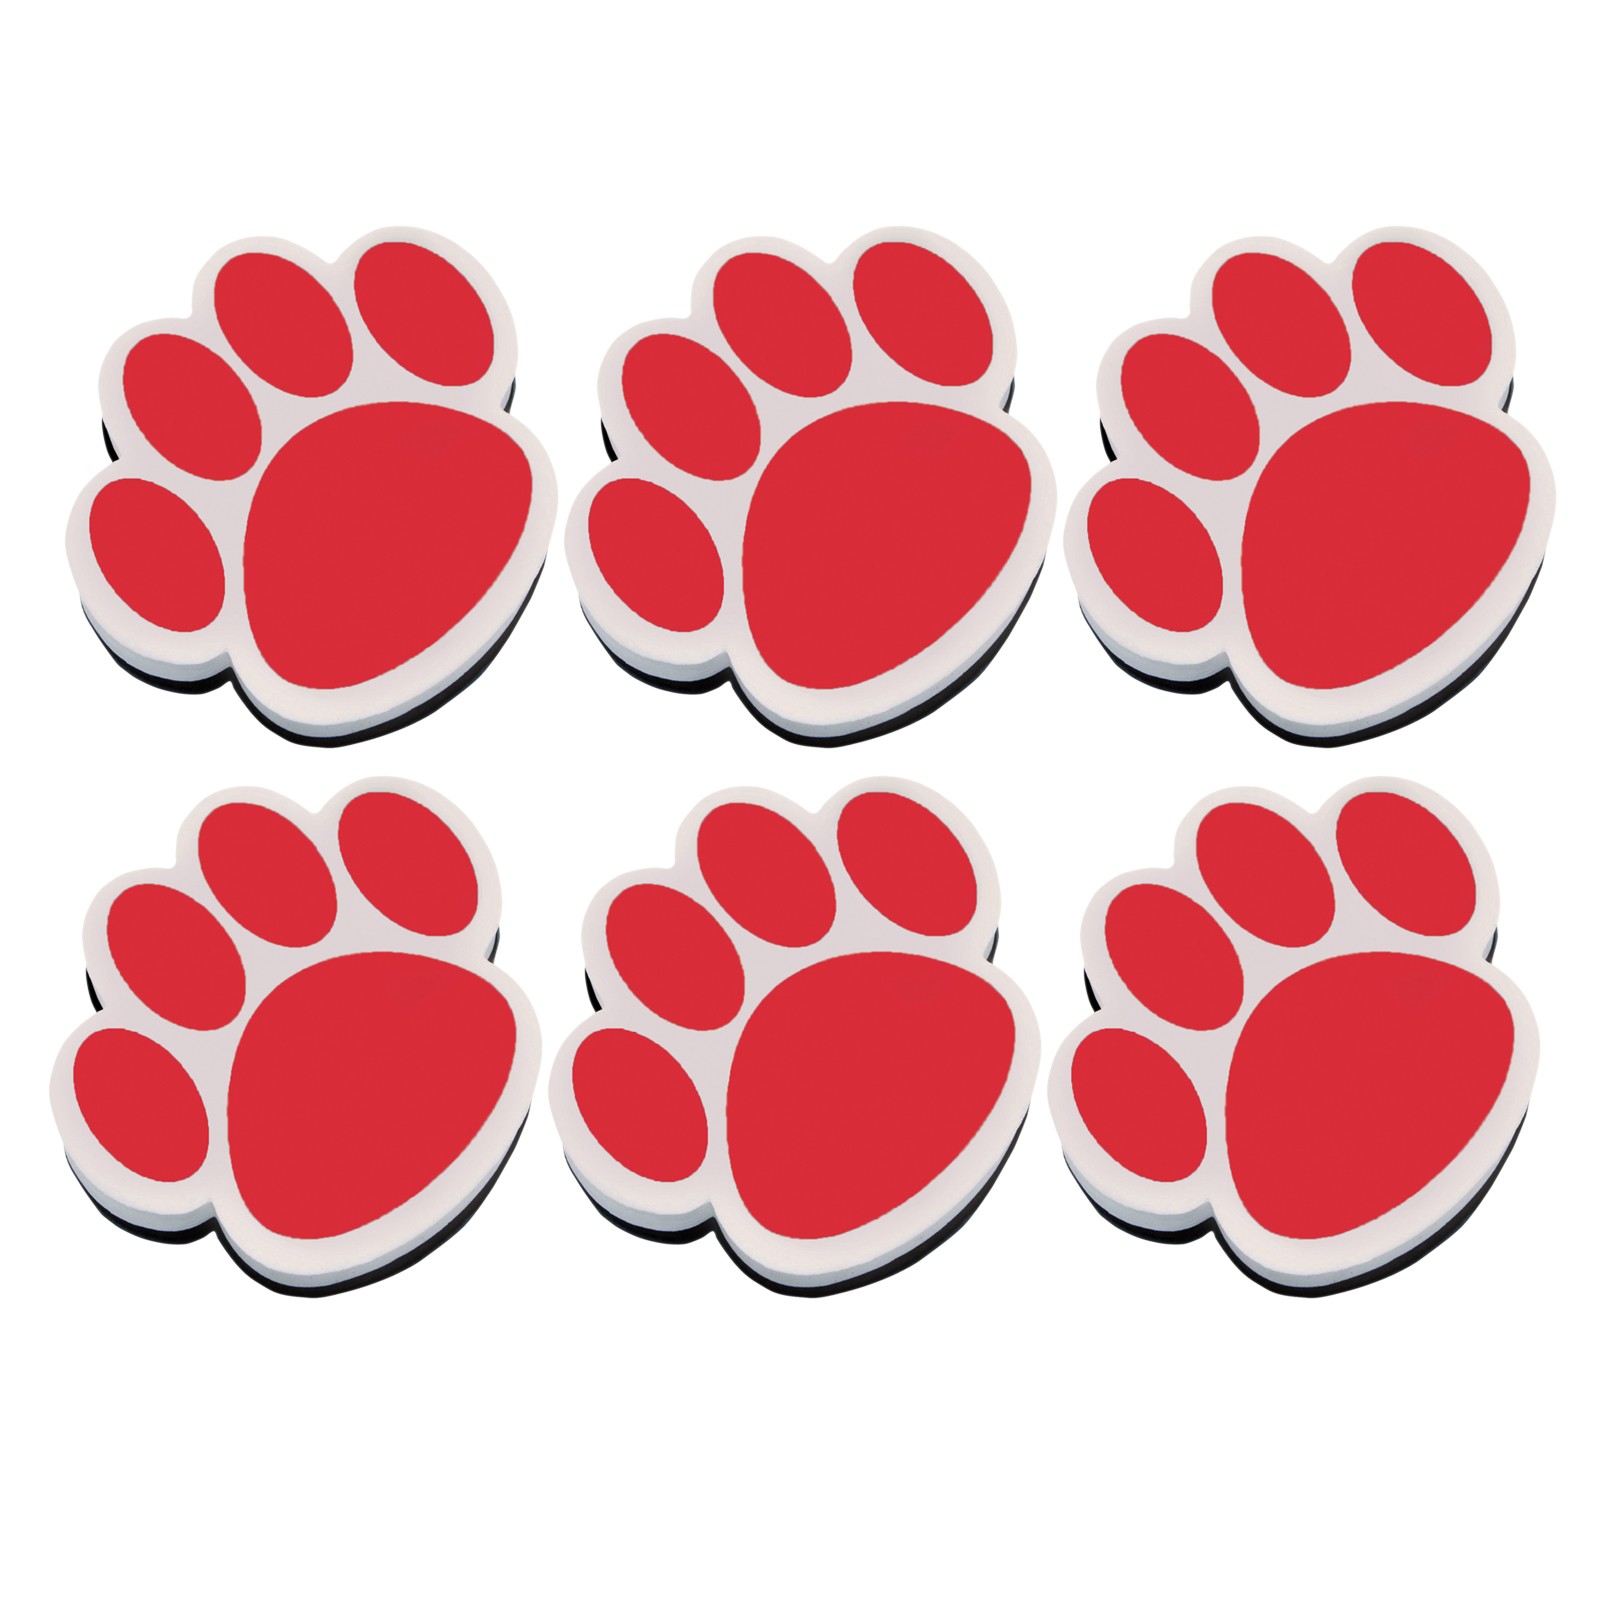 Magnetic Whiteboard Eraser, Red Paw, Pack of 6